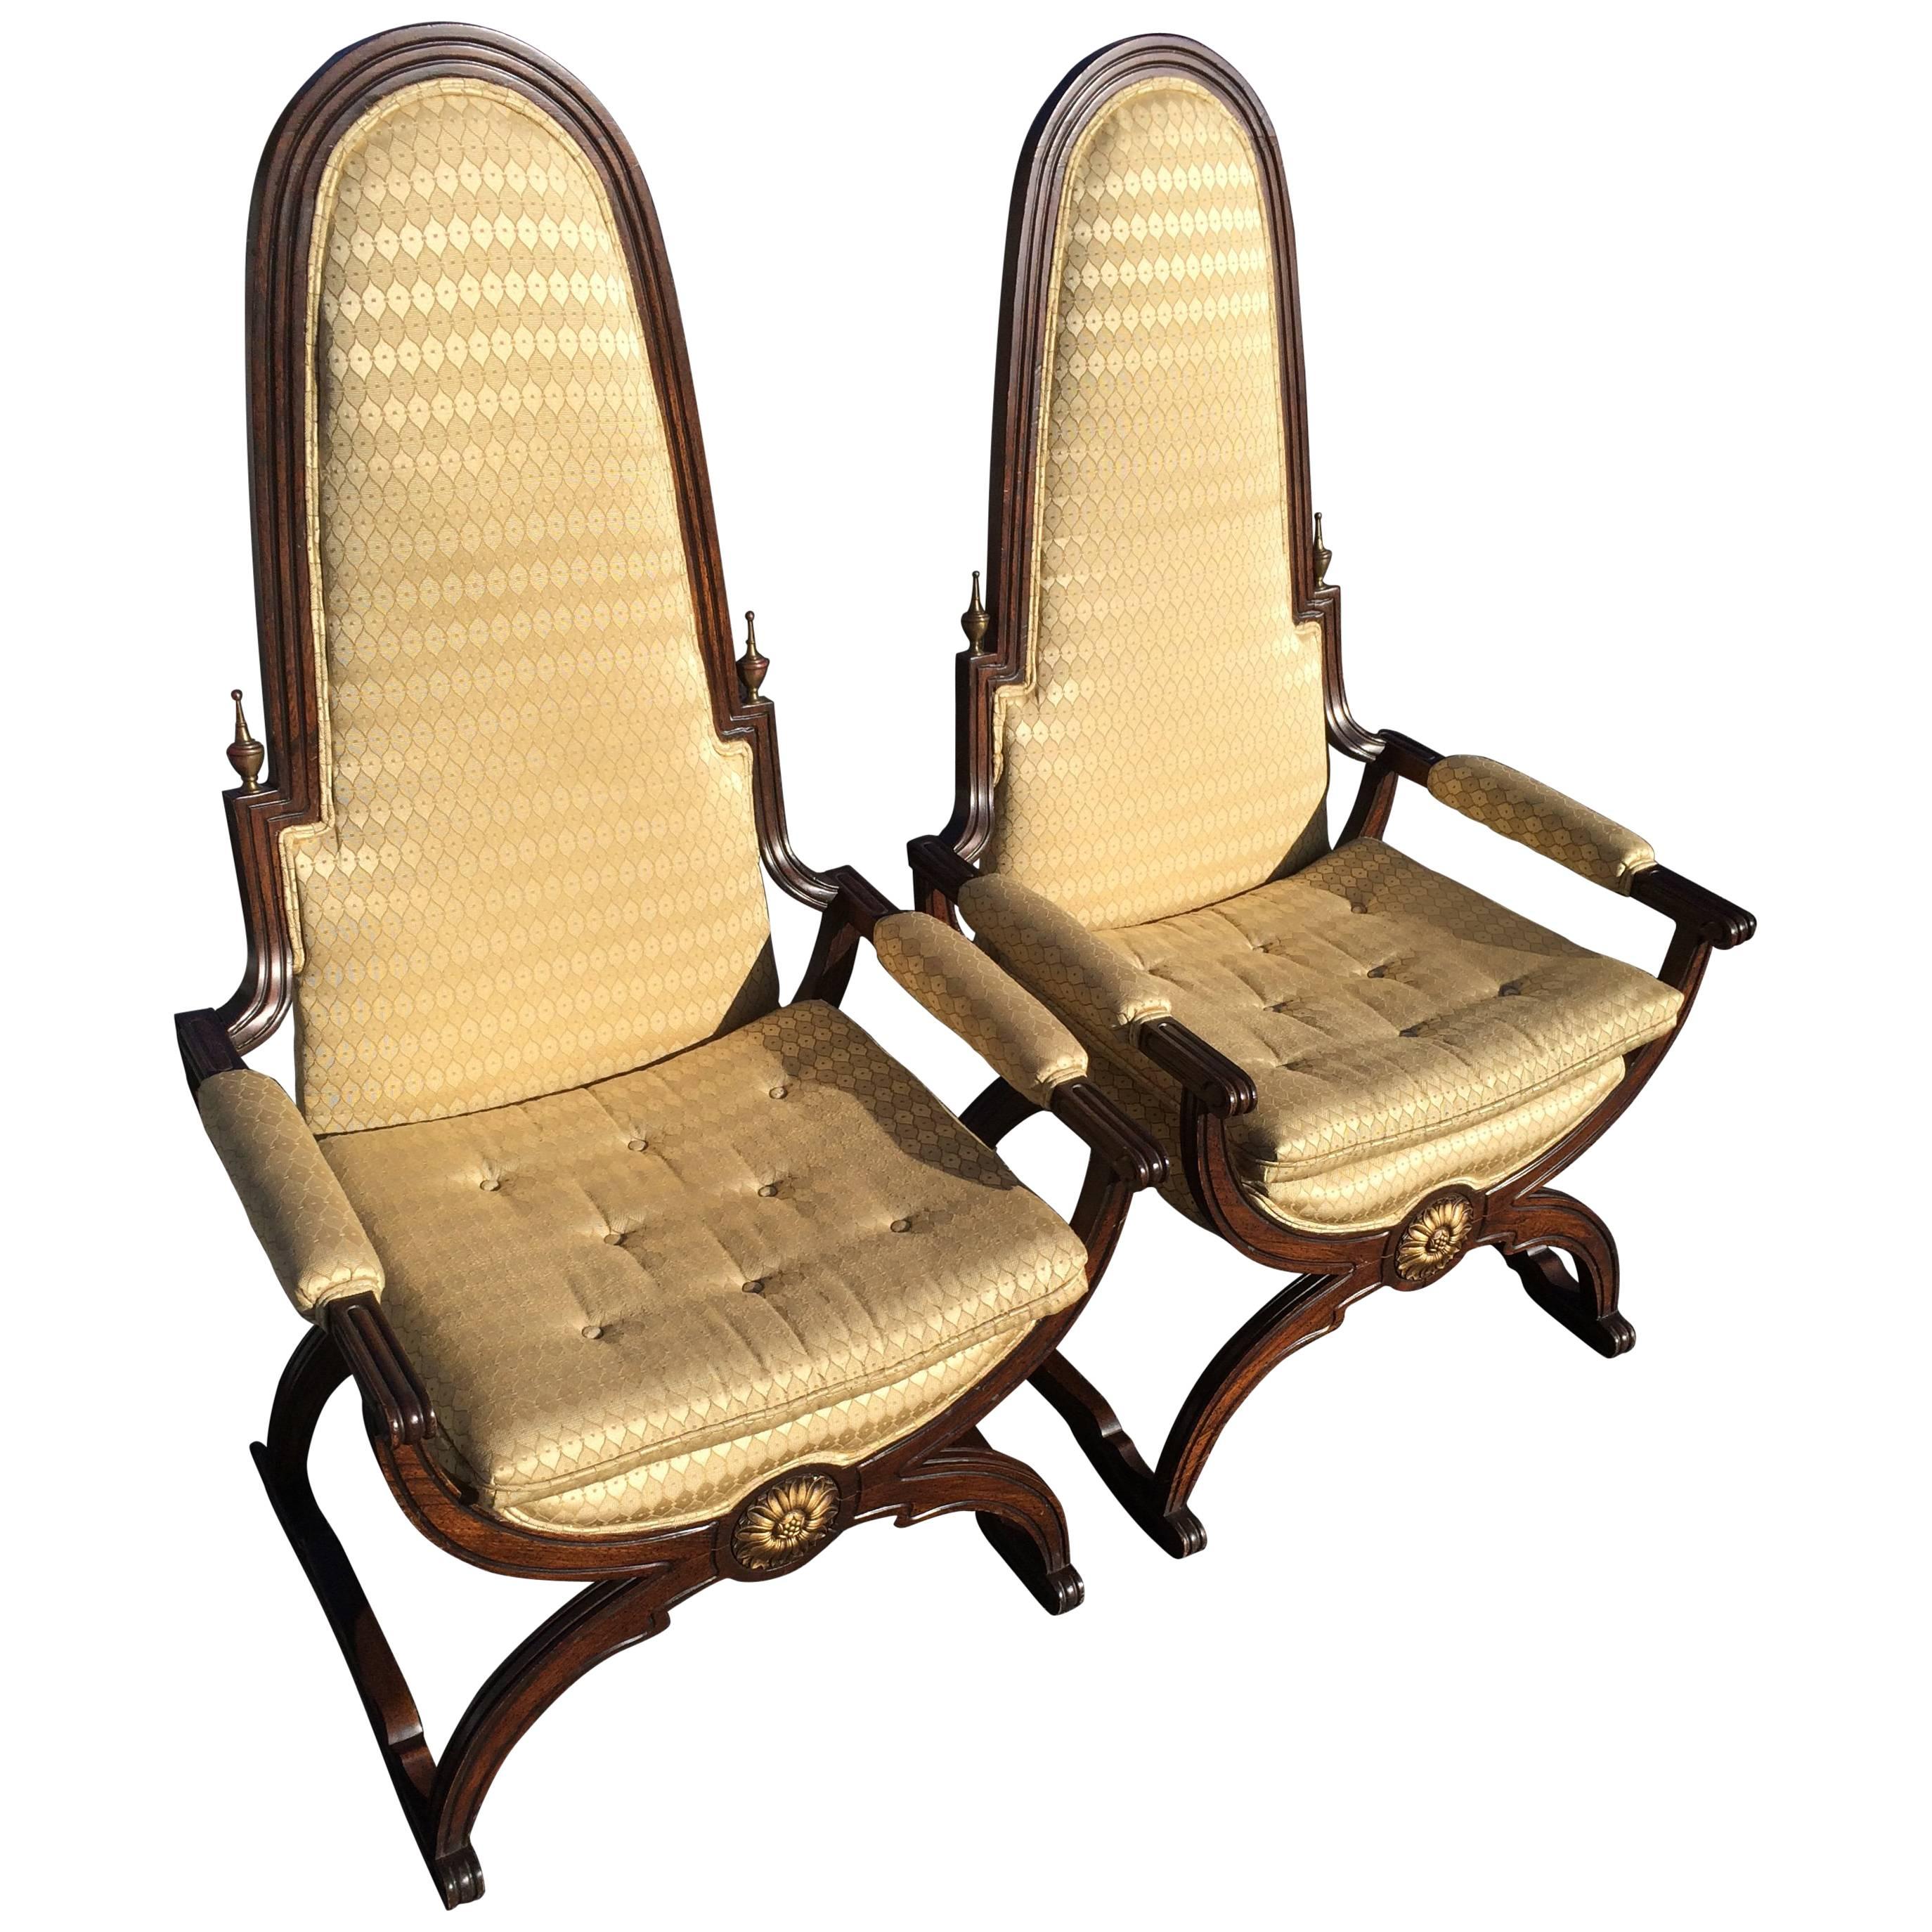 Pair of Hollywood Regency Dorothy Draper Style Throne Chairs